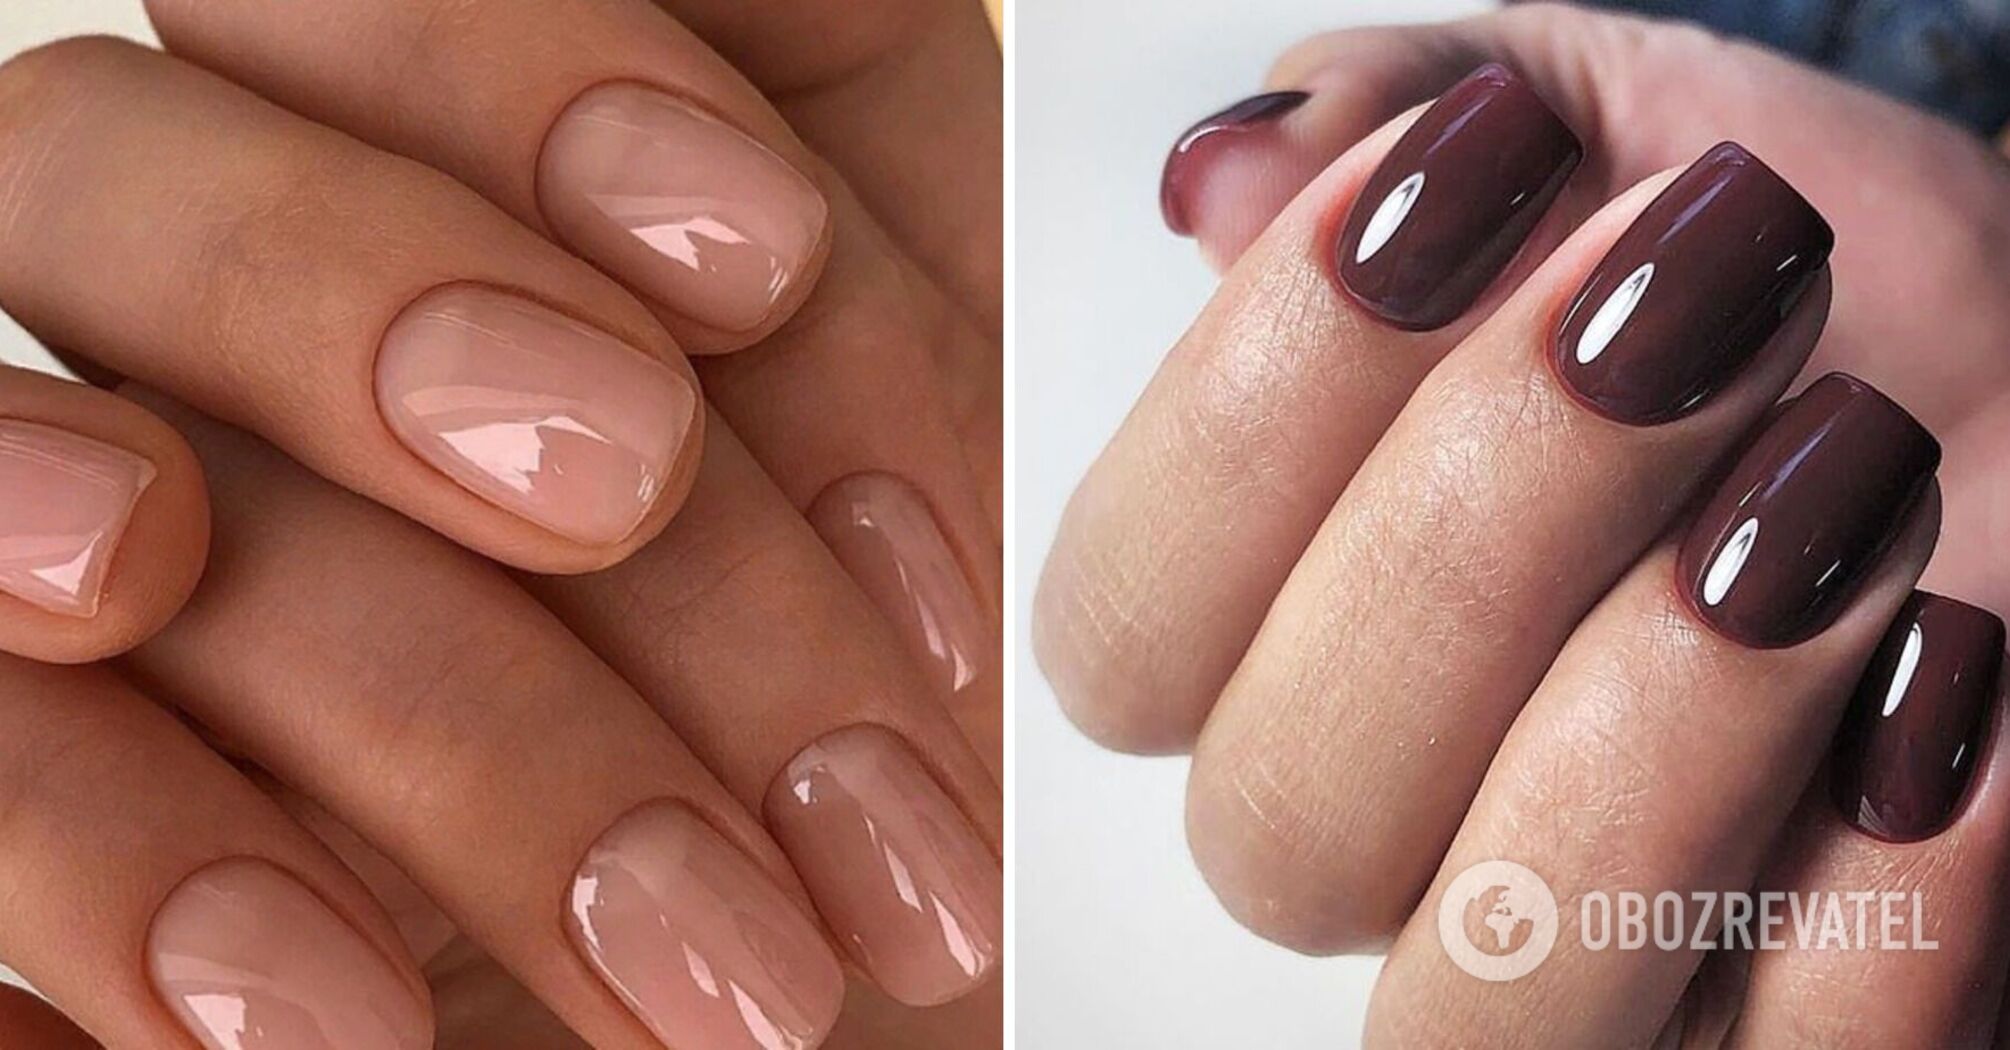 Nude and brown are always in fashion